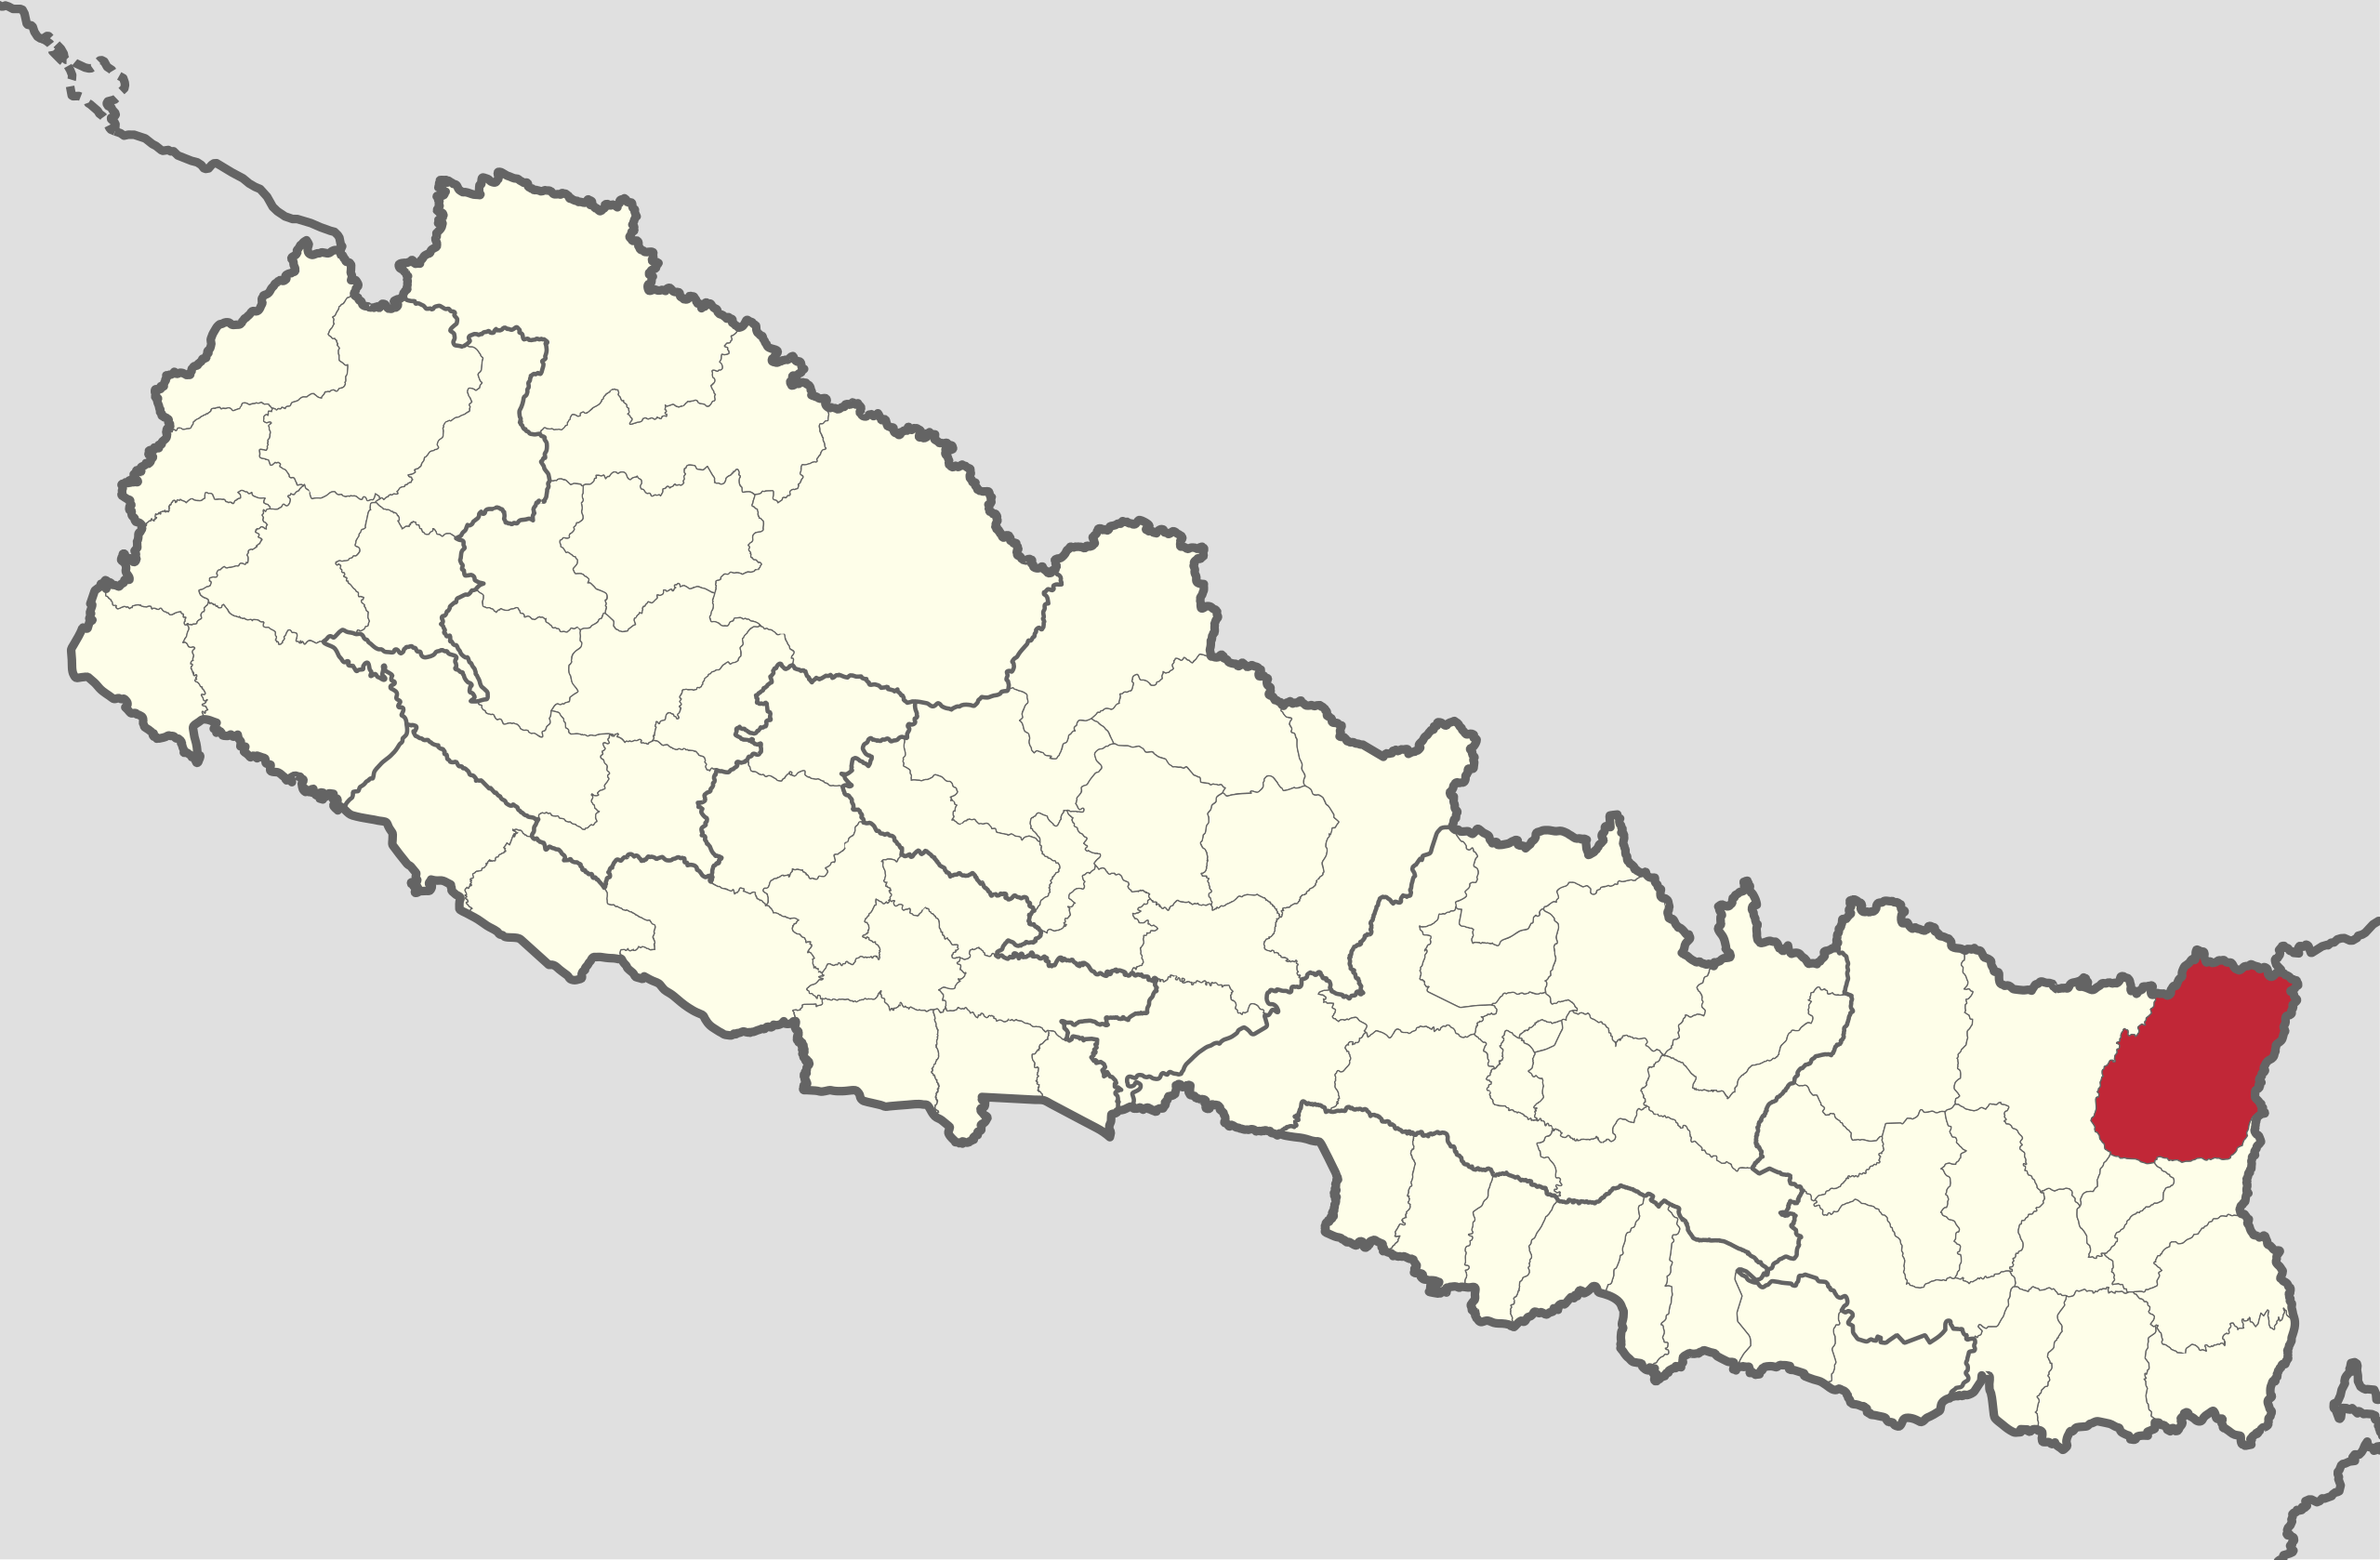 Ten candidates were elected unopposed in Taplejung